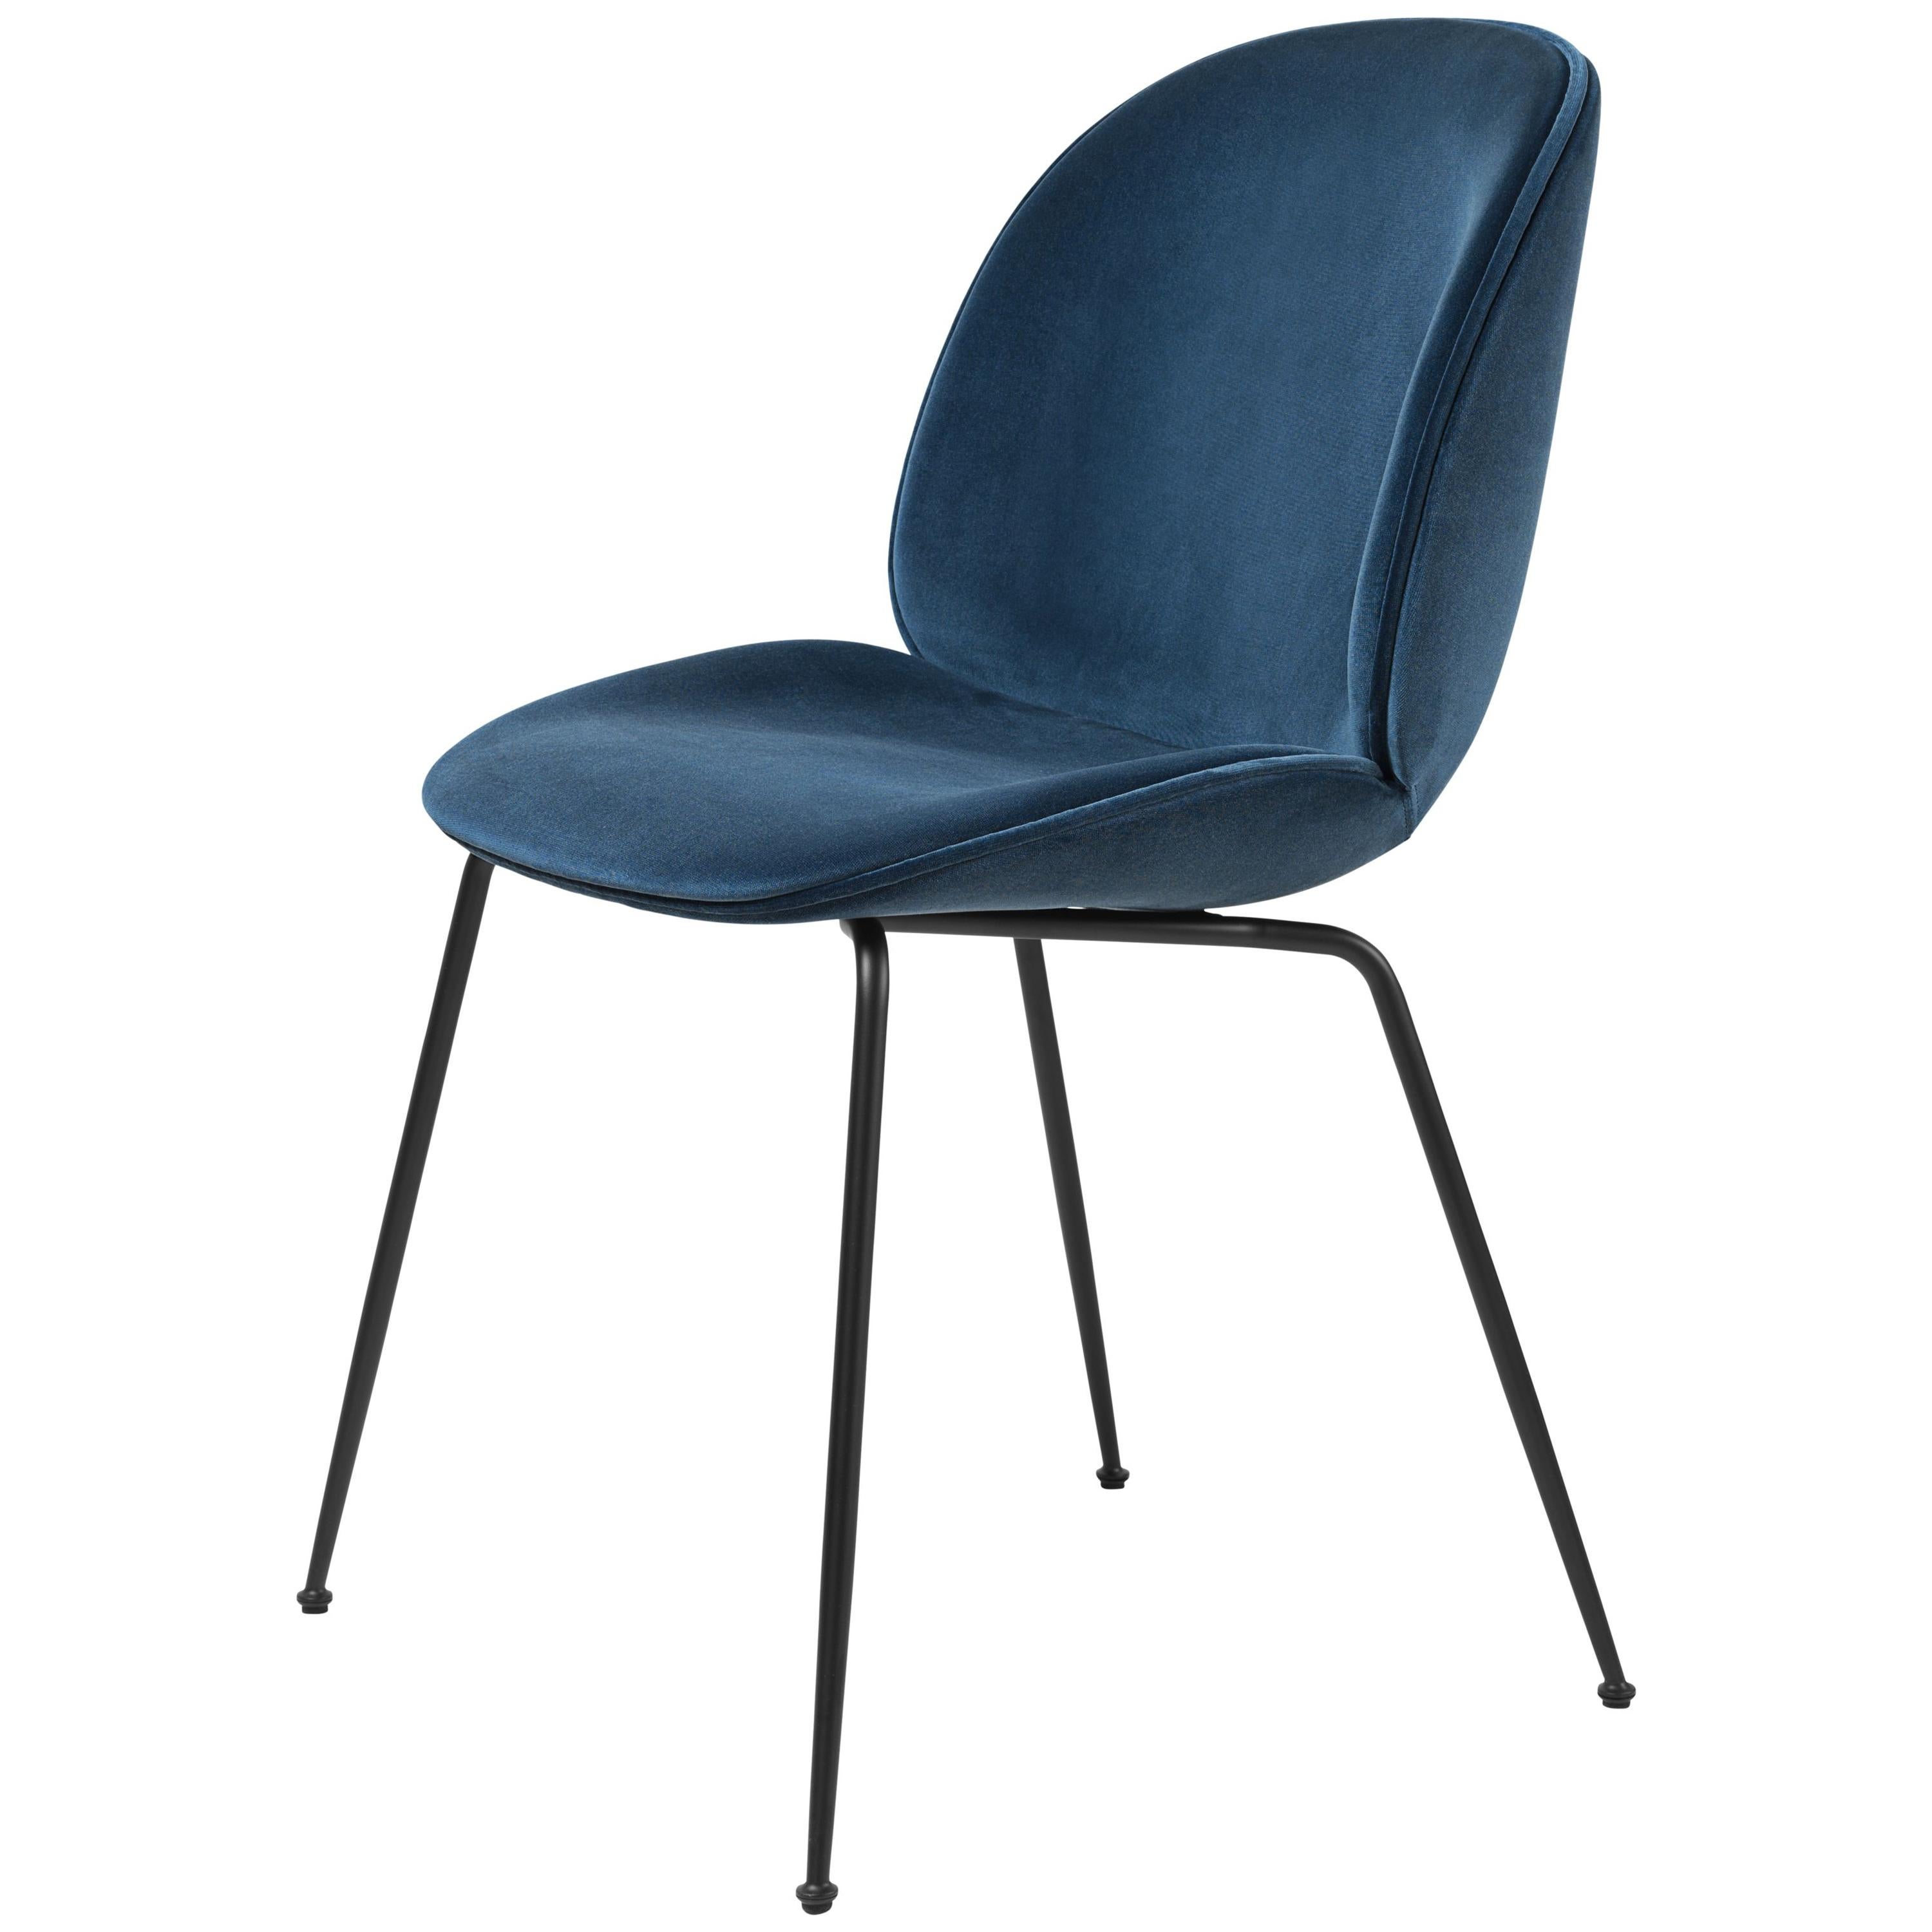 GamFratesi 'Beetle' Dining Chair in Blue with Conic Base